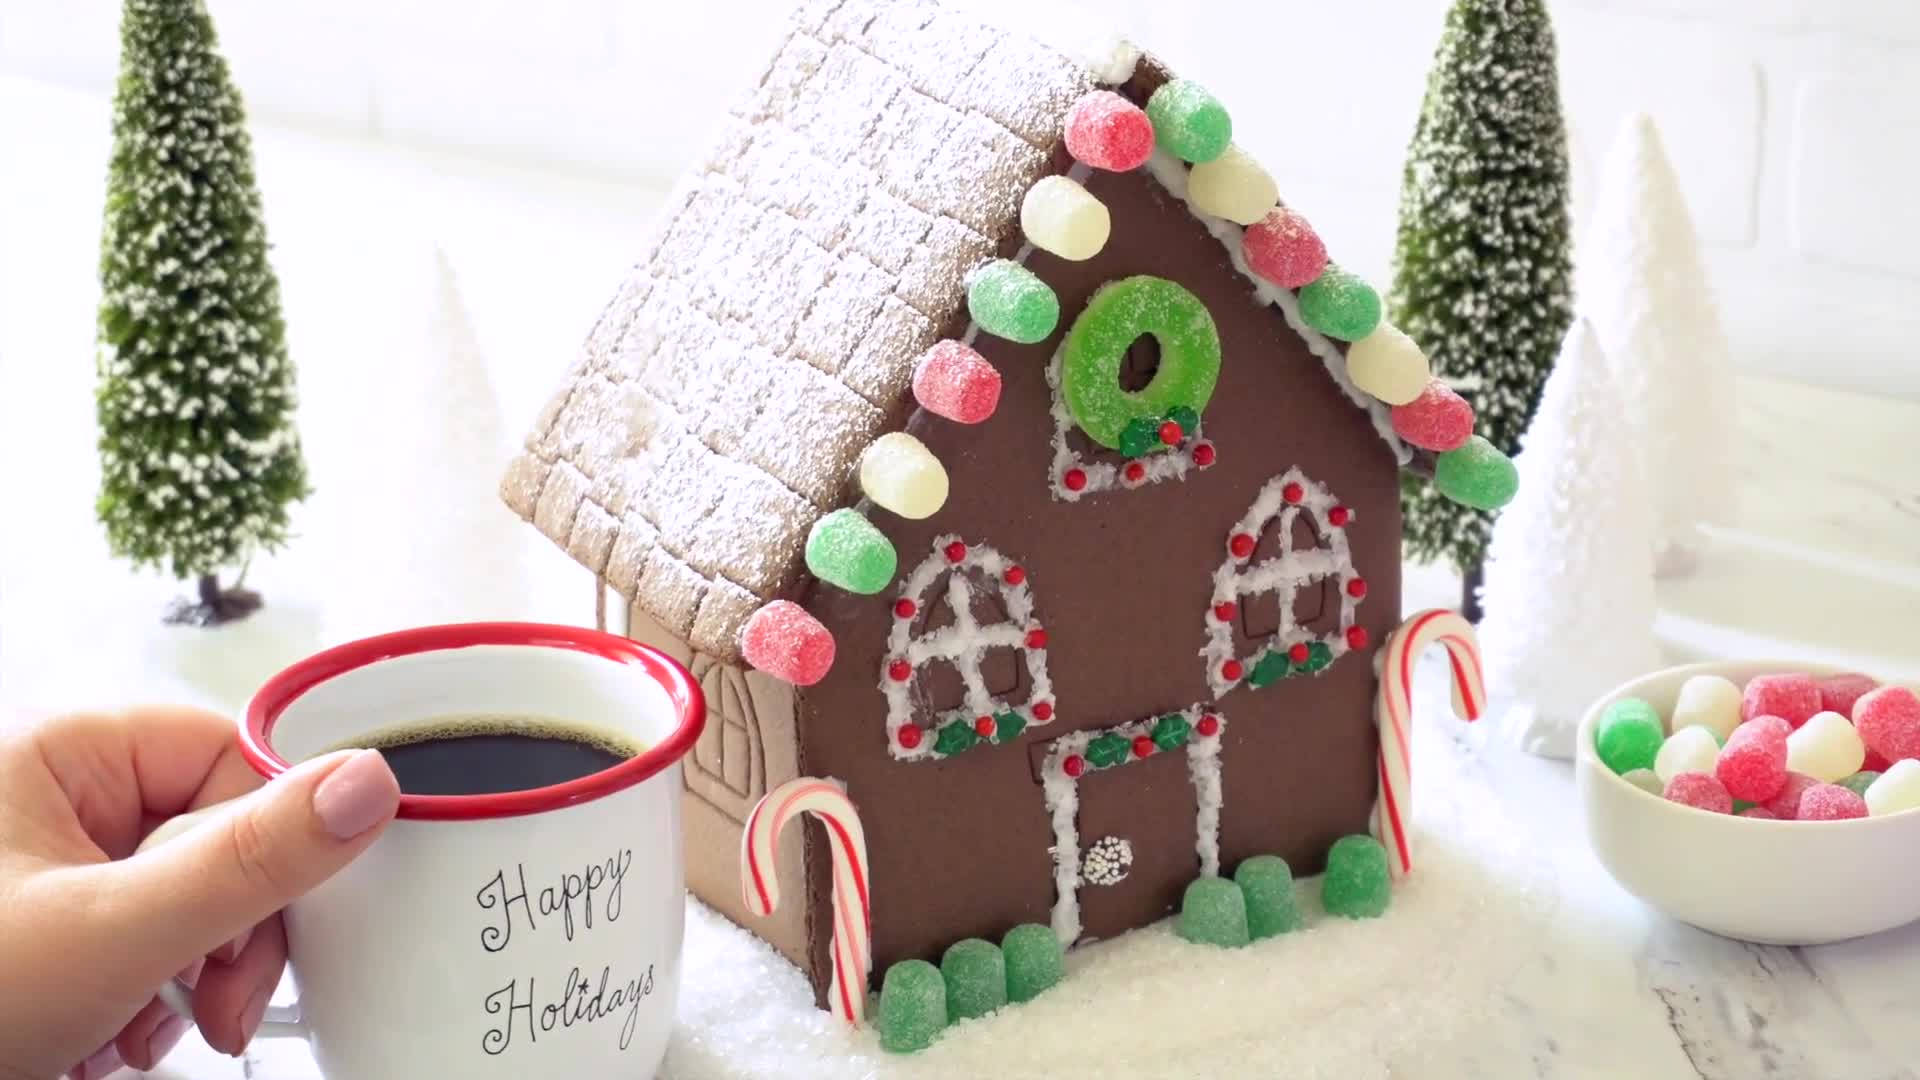 Sugary Gingerbread House Background